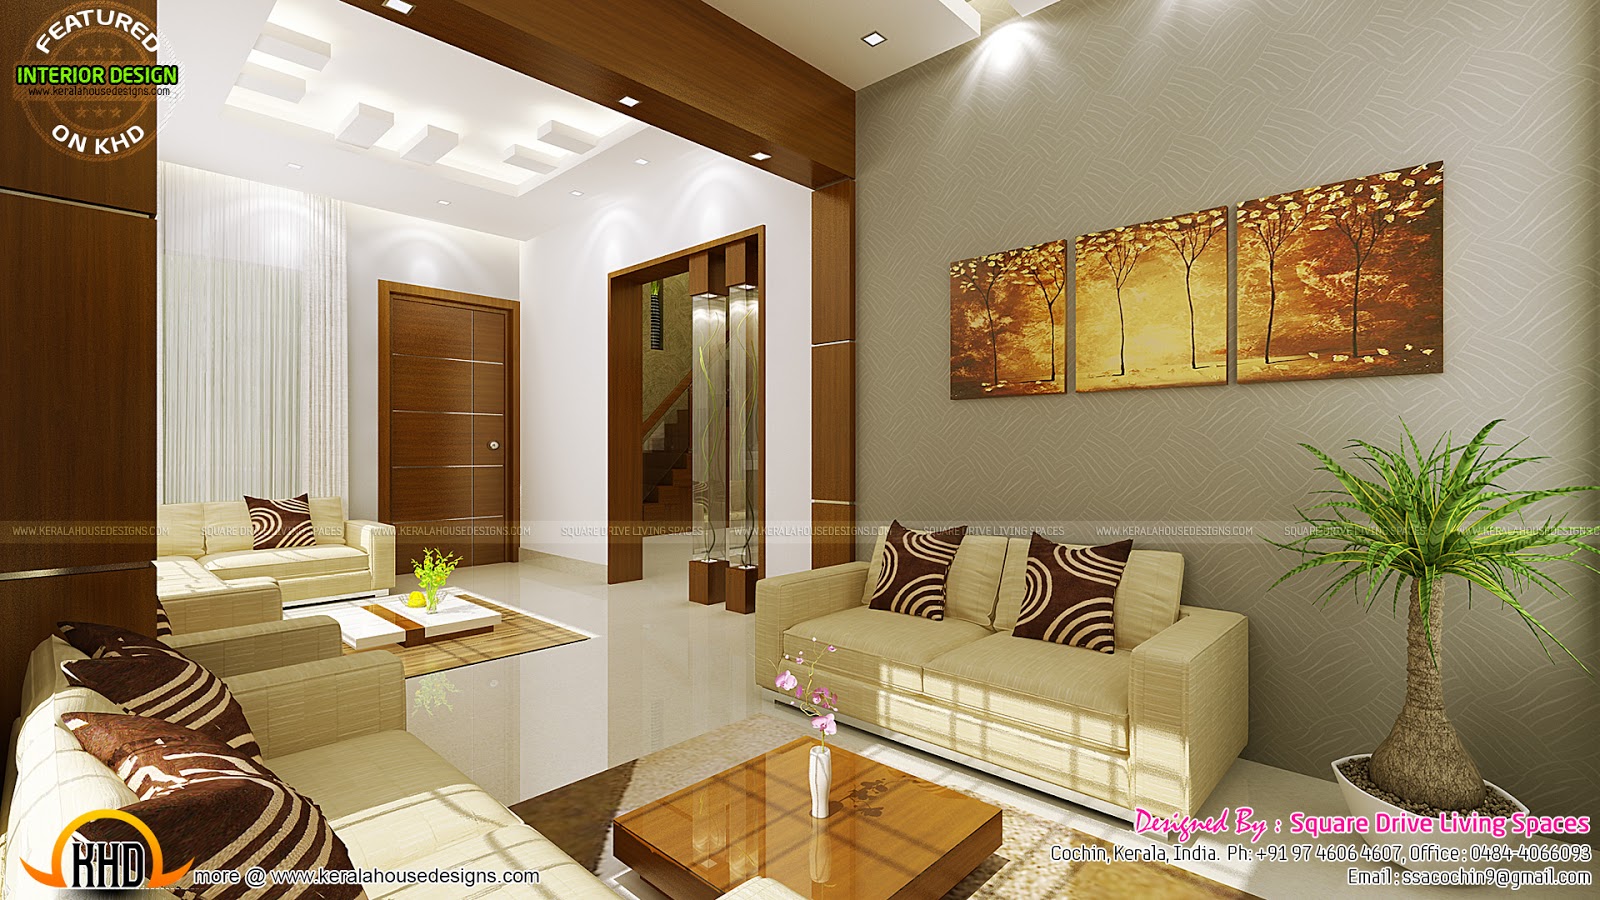 Contemporary kitchen, dining and living room  Kerala home design and floor plans